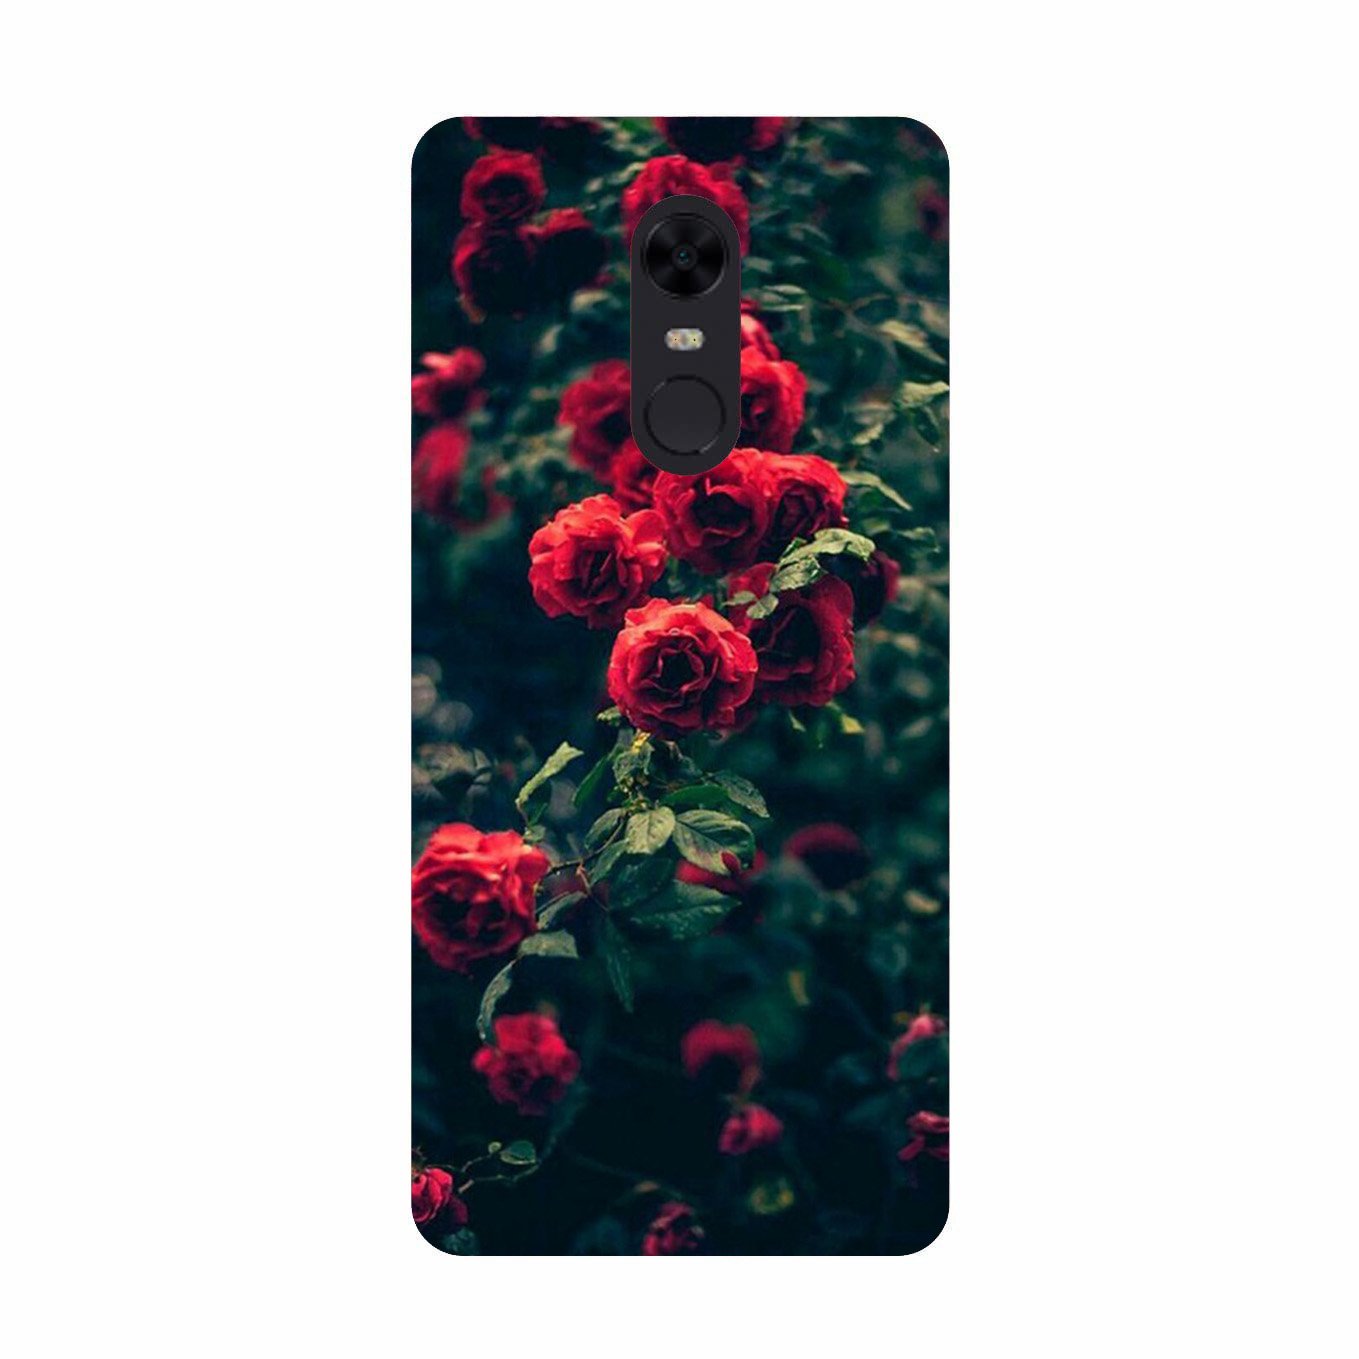 Red Rose Case for Redmi 5